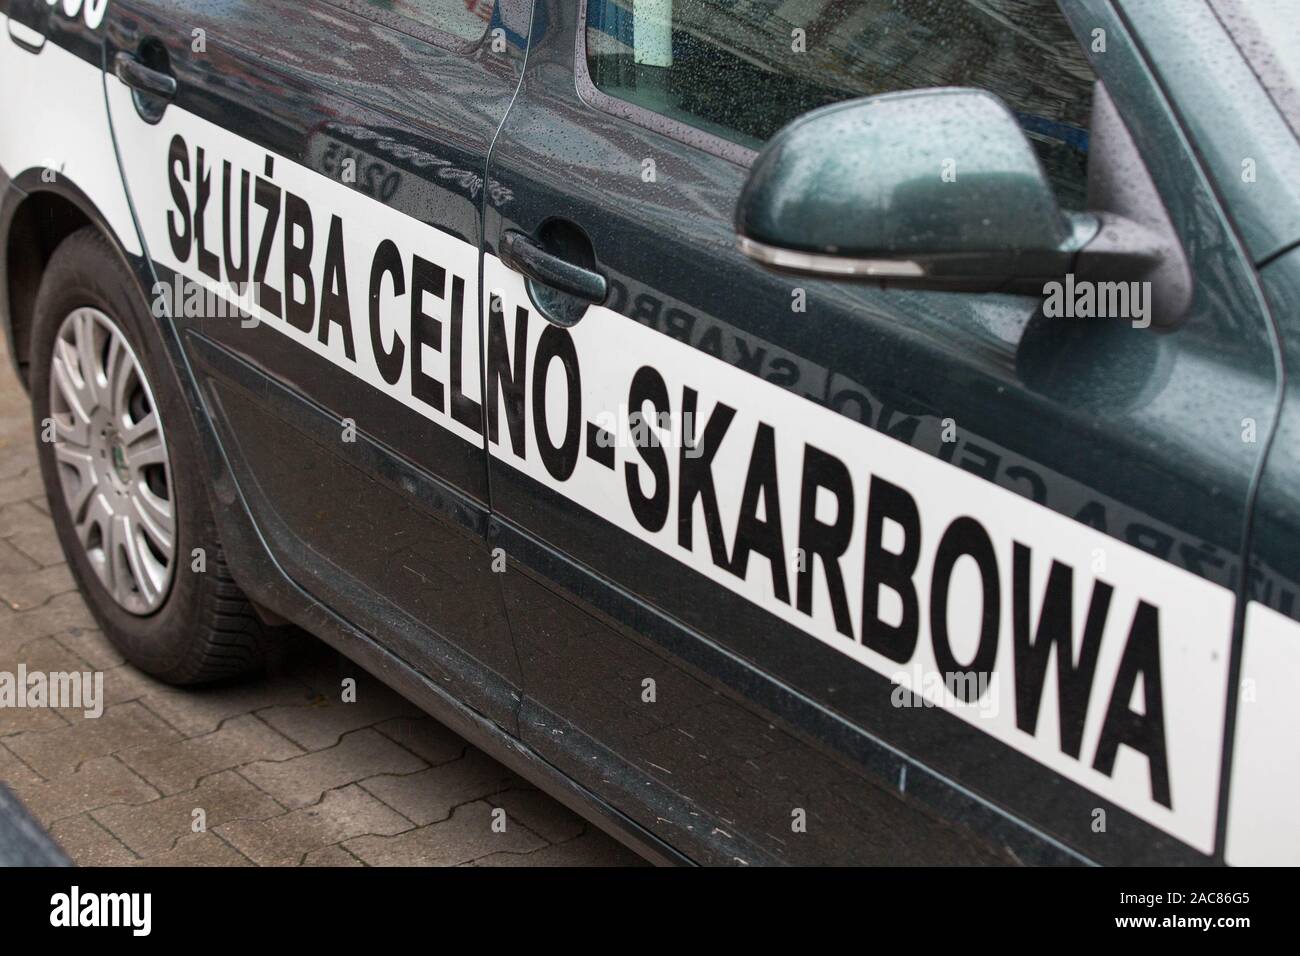 Zgorzelec, Poland. 18th Nov, 2019. A vehicle of the Customs Service seen in Zgorzelec.Zgorzelec and Goerlitz are partner cities of the Euro region Neisse located in Saxony (Germany) and Lower Silesia Credit: Karol Serewis/SOPA Images/ZUMA Wire/Alamy Live News Stock Photo